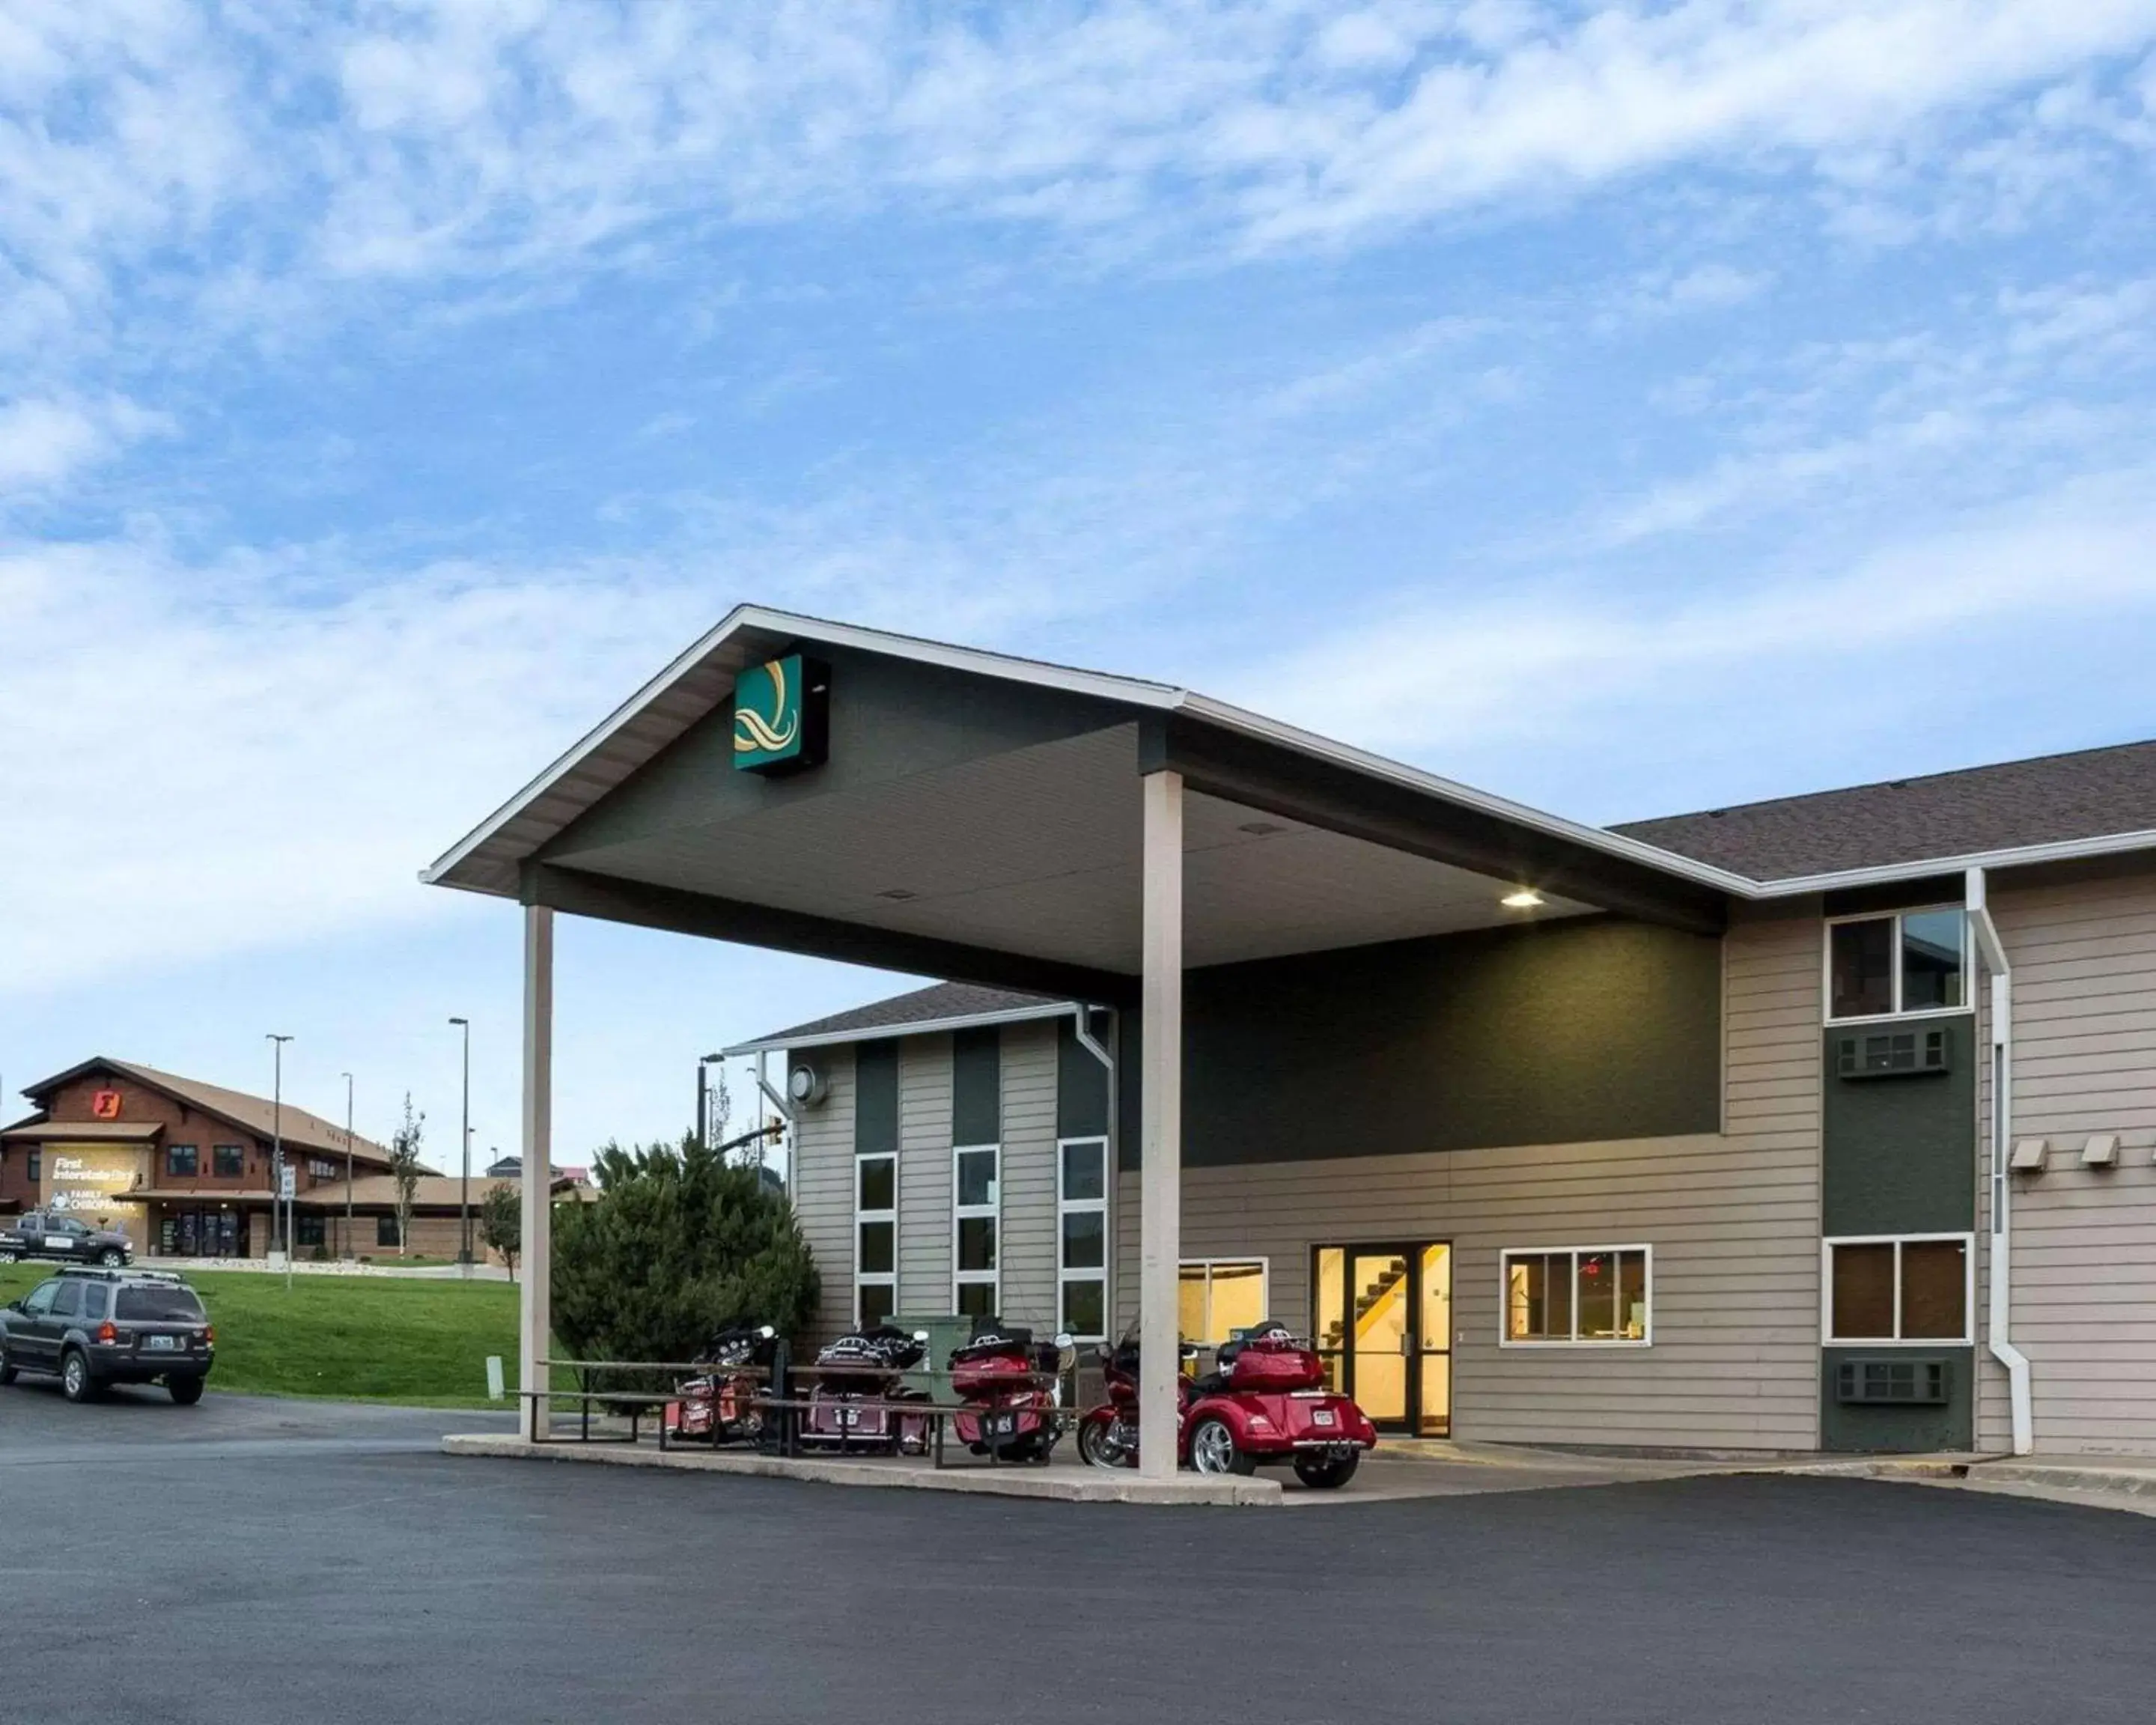 Property Building in Quality Inn Spearfish